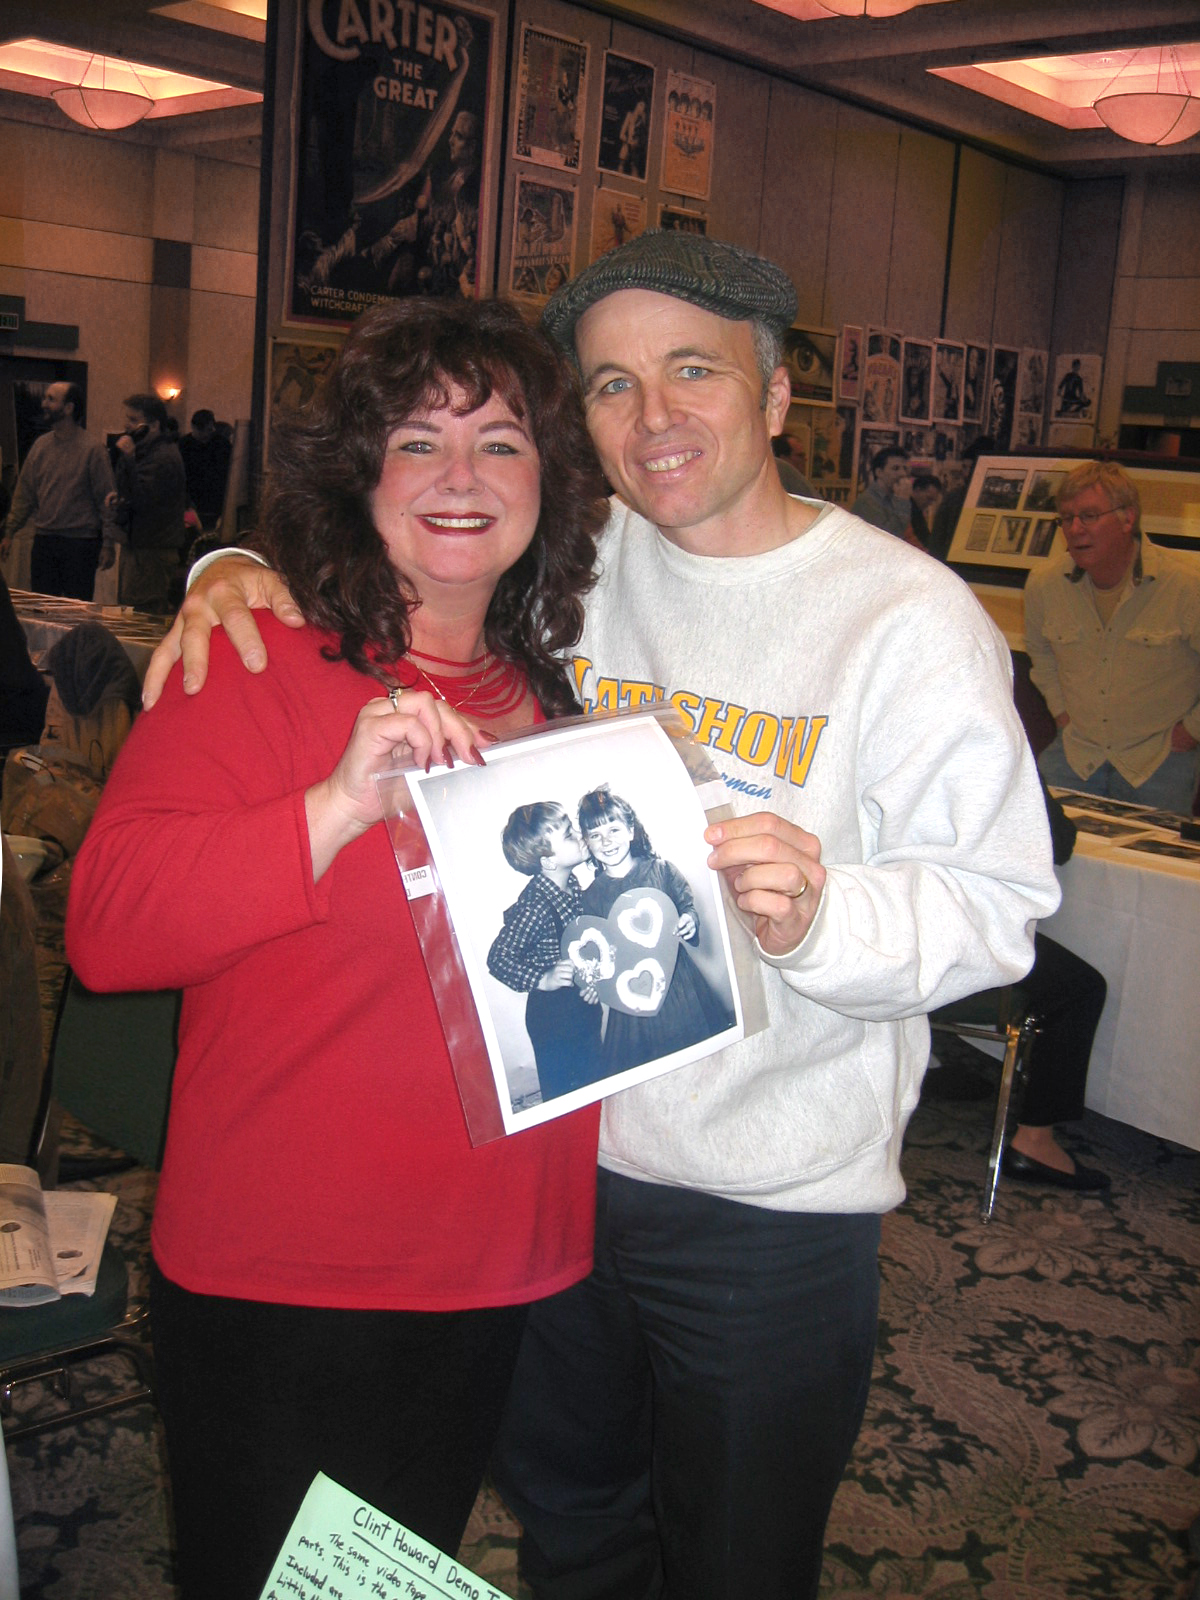 Clint Howard and I. See the photo in our hands? Then and Now Love you Clint! Always did Always will